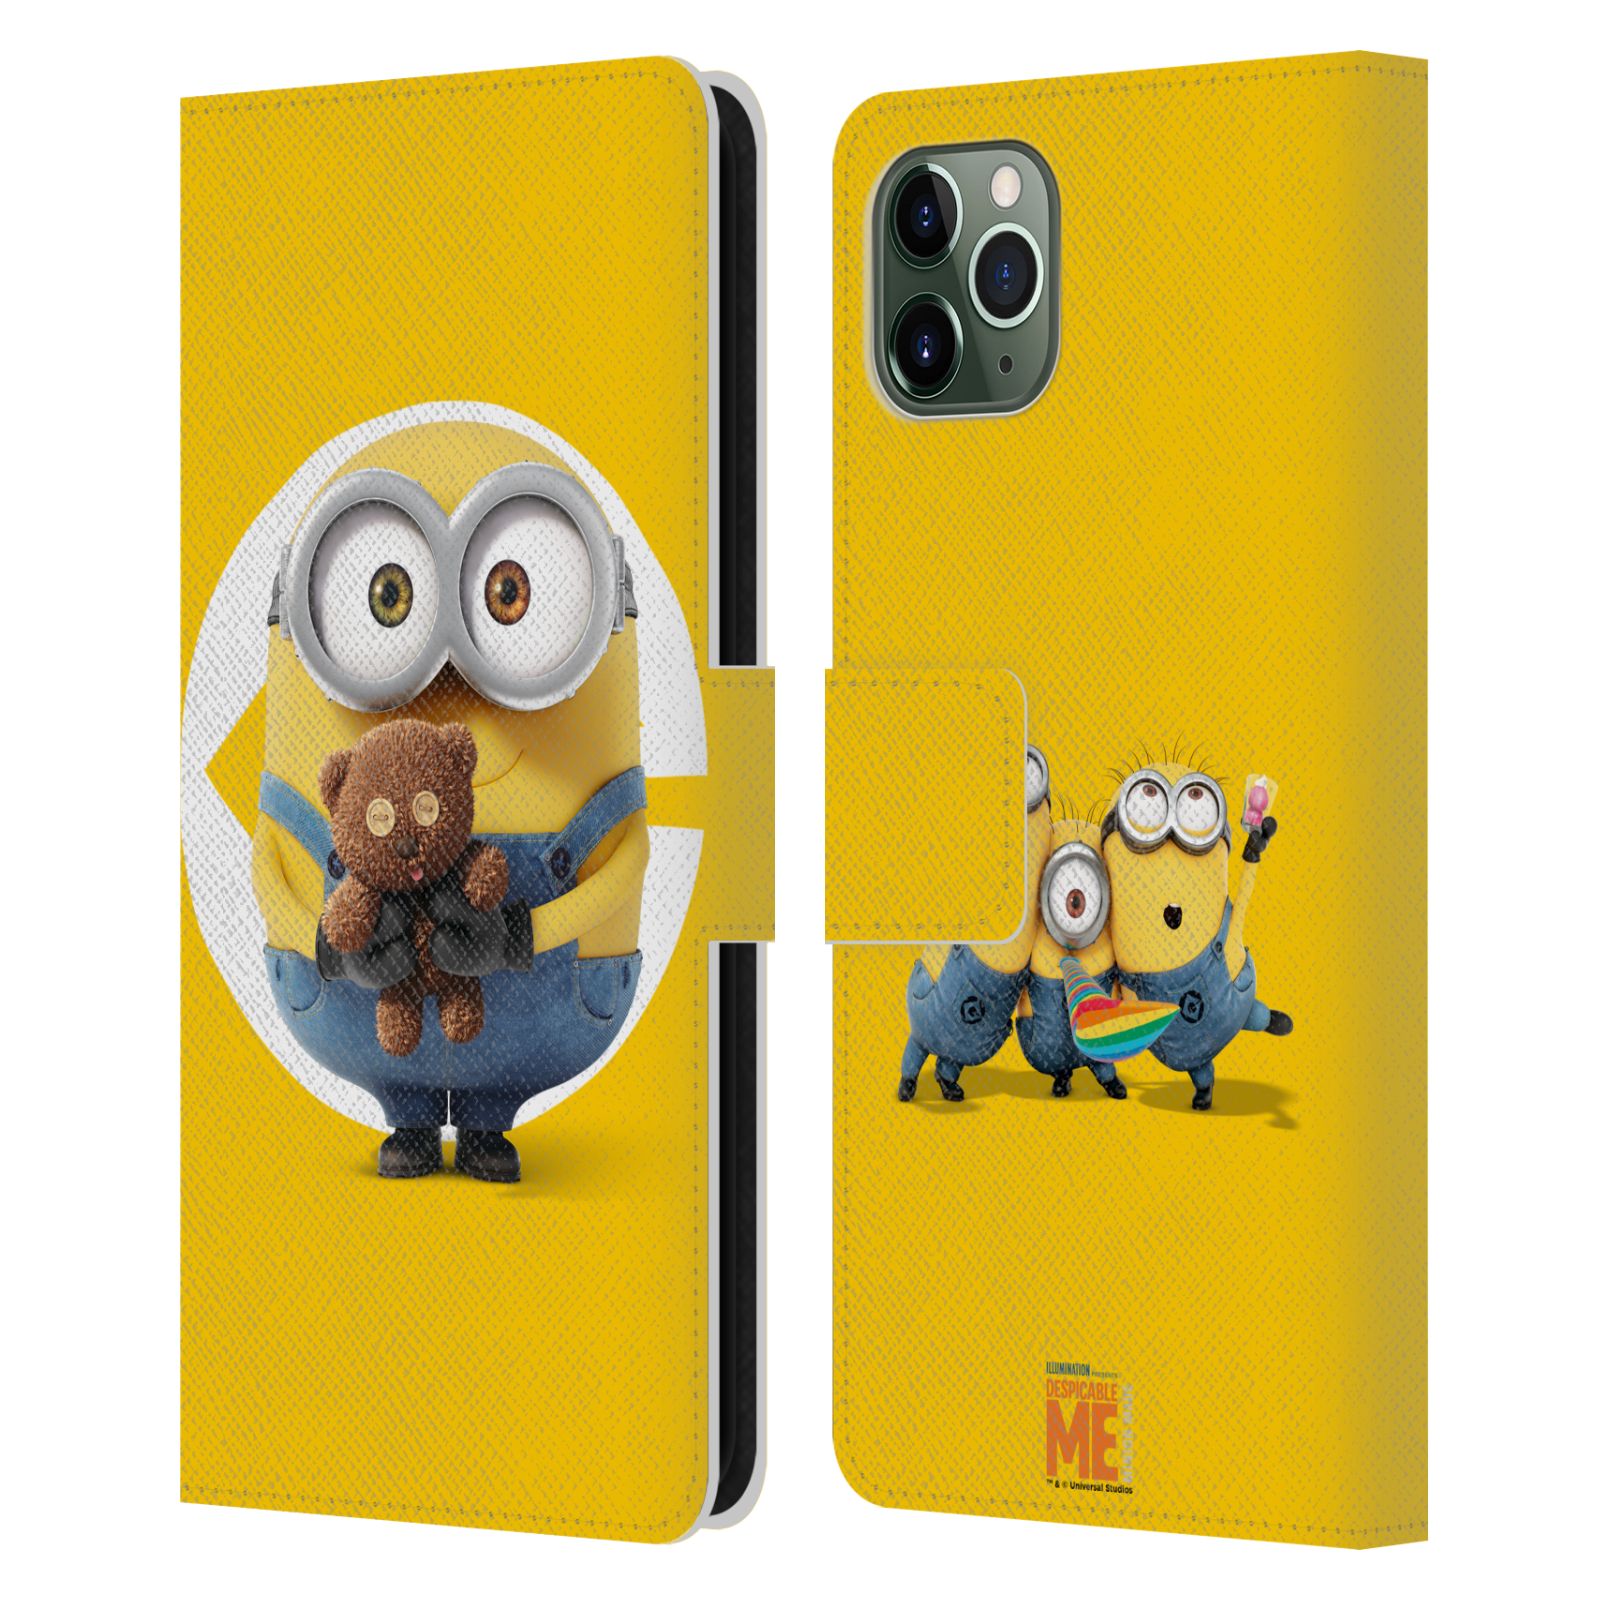 antiek Bloeien been OFFICIAL DESPICABLE ME MINIONS LEATHER BOOK WALLET CASE FOR APPLE iPHONE  PHONES | eBay